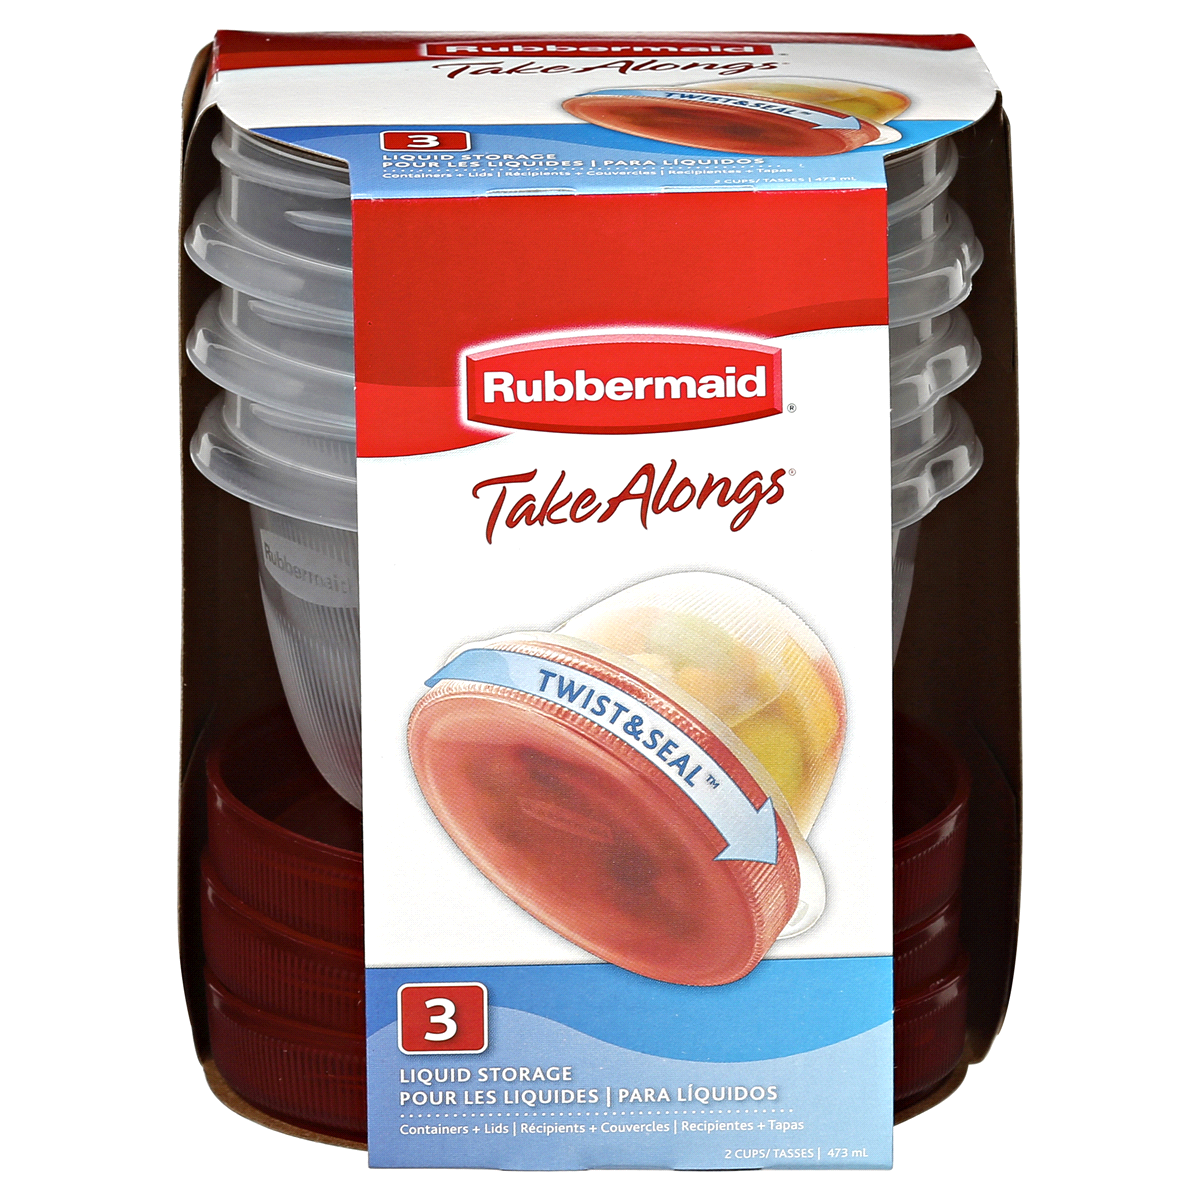 Rubbermaid Takealongs Twist and Seal Liquid Storage Container 3 ct